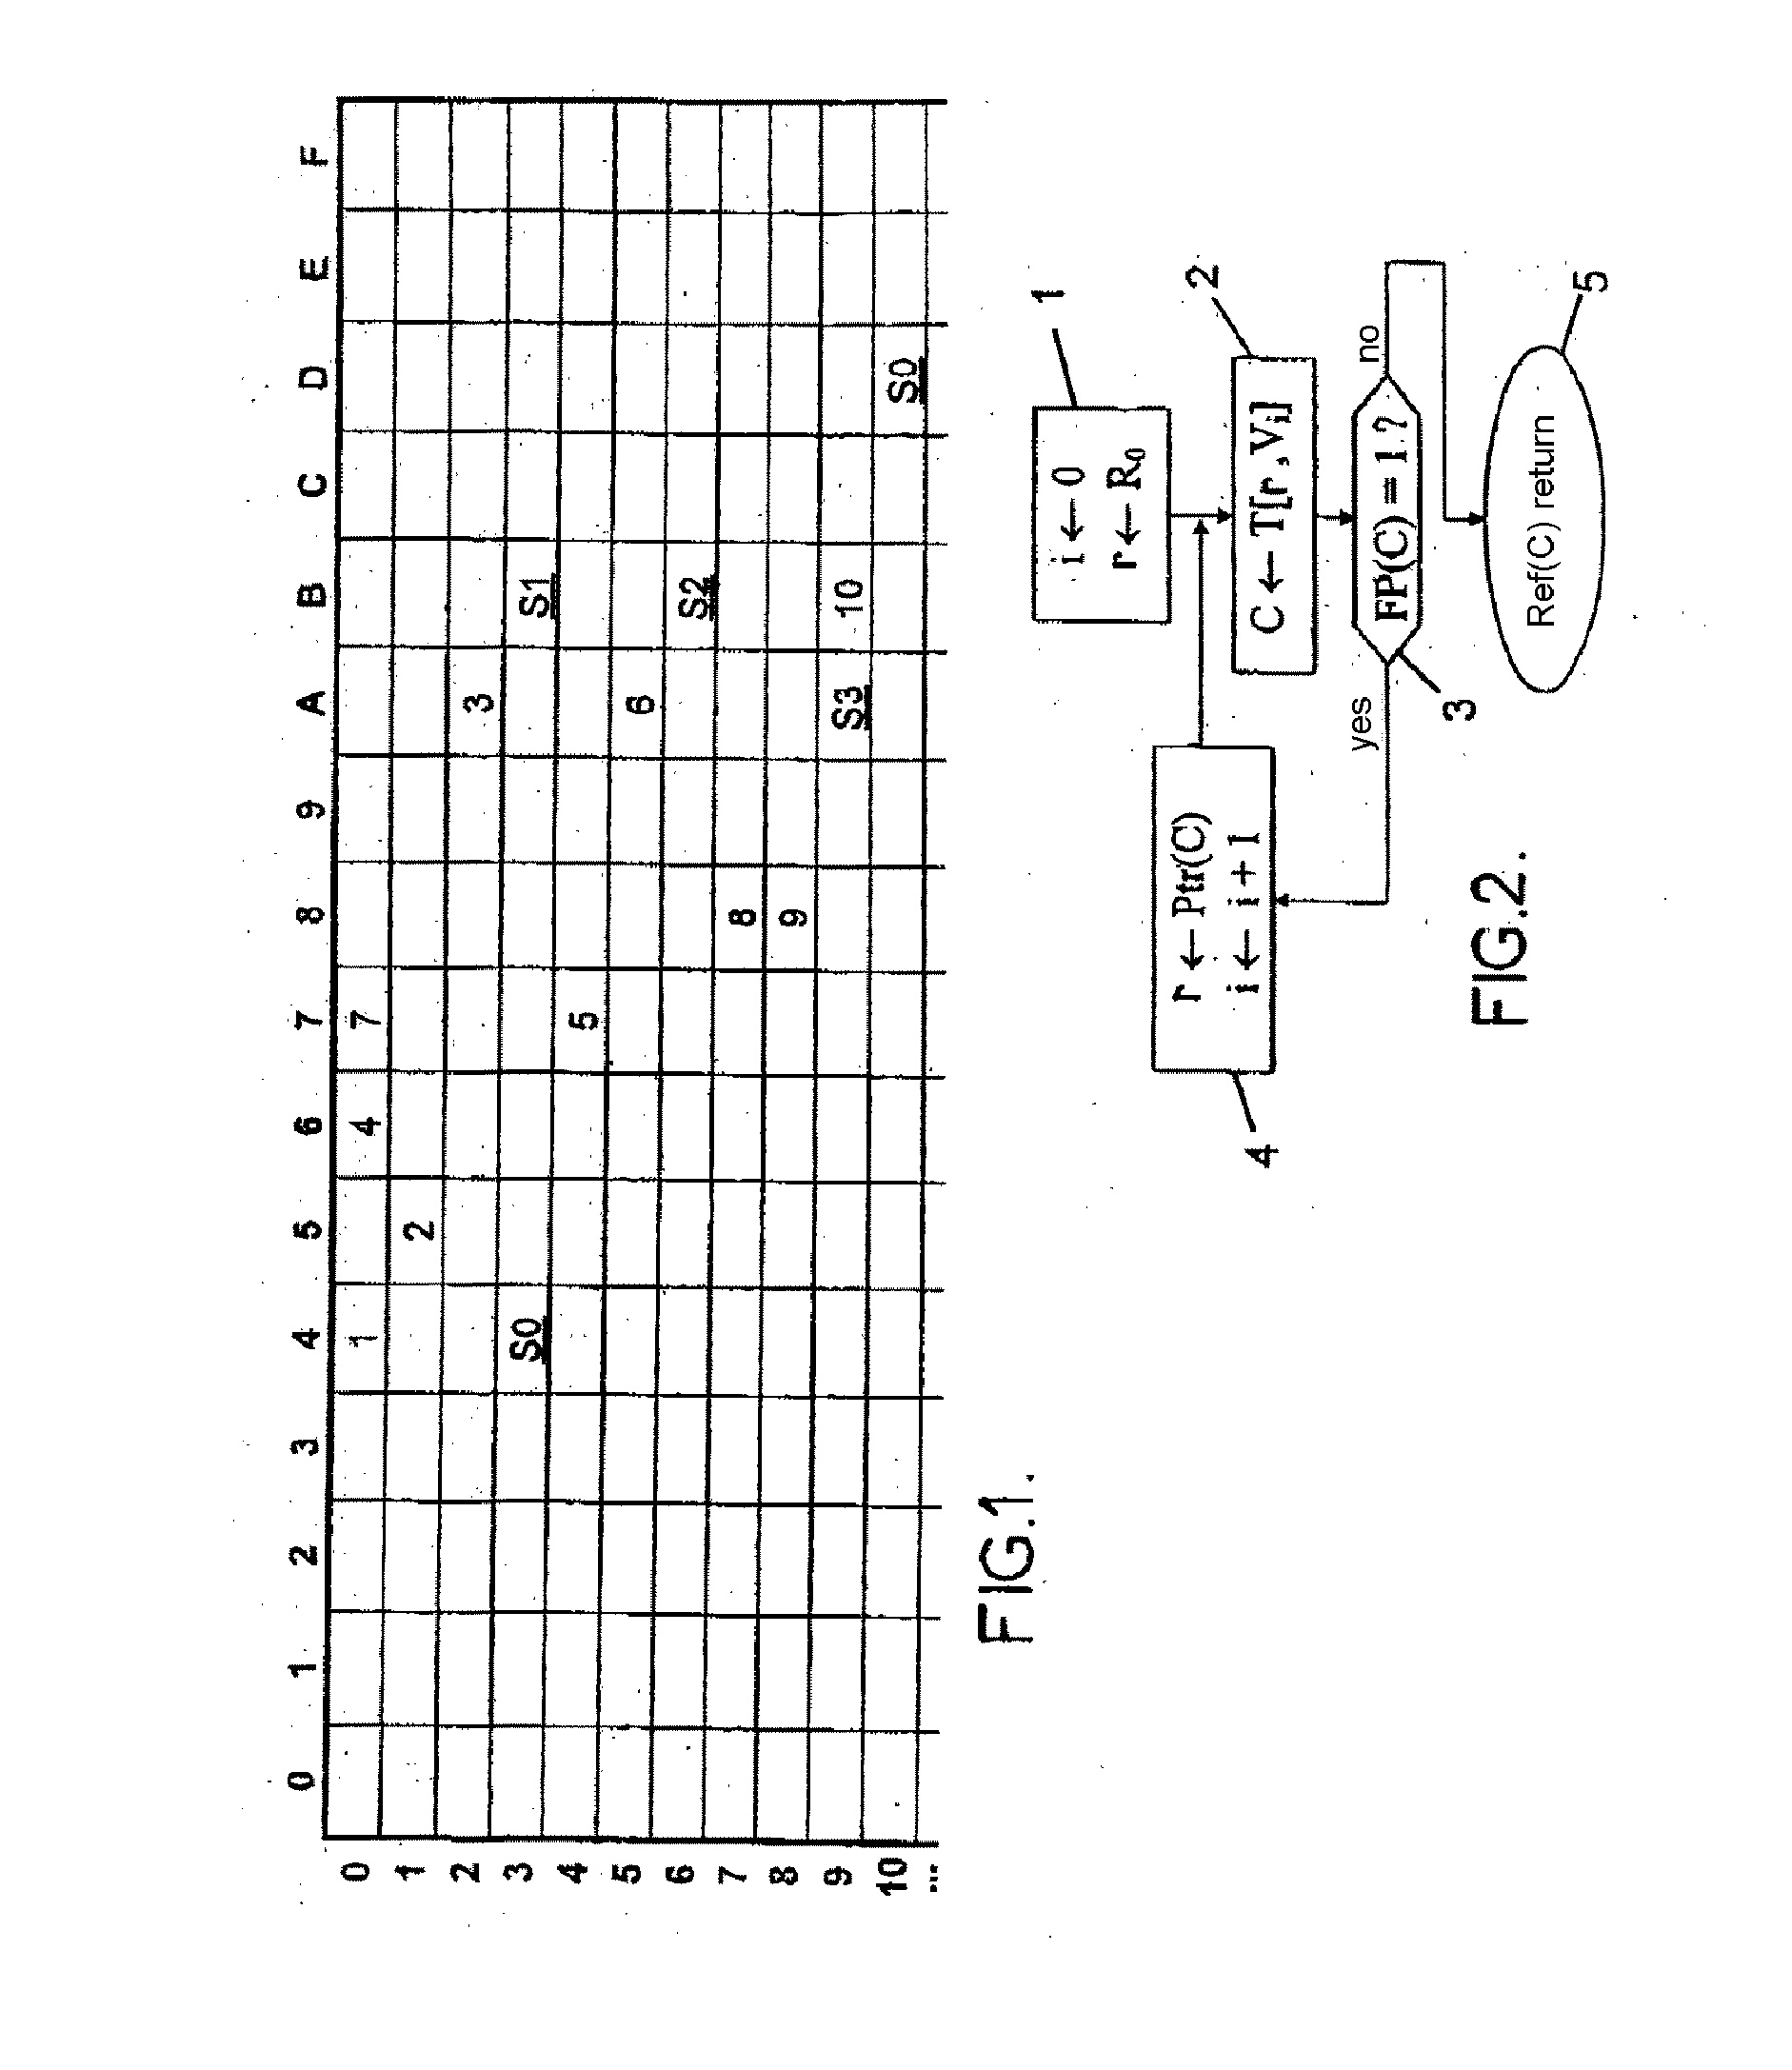 Trie-Type Memory Device With a Compression Mechanism